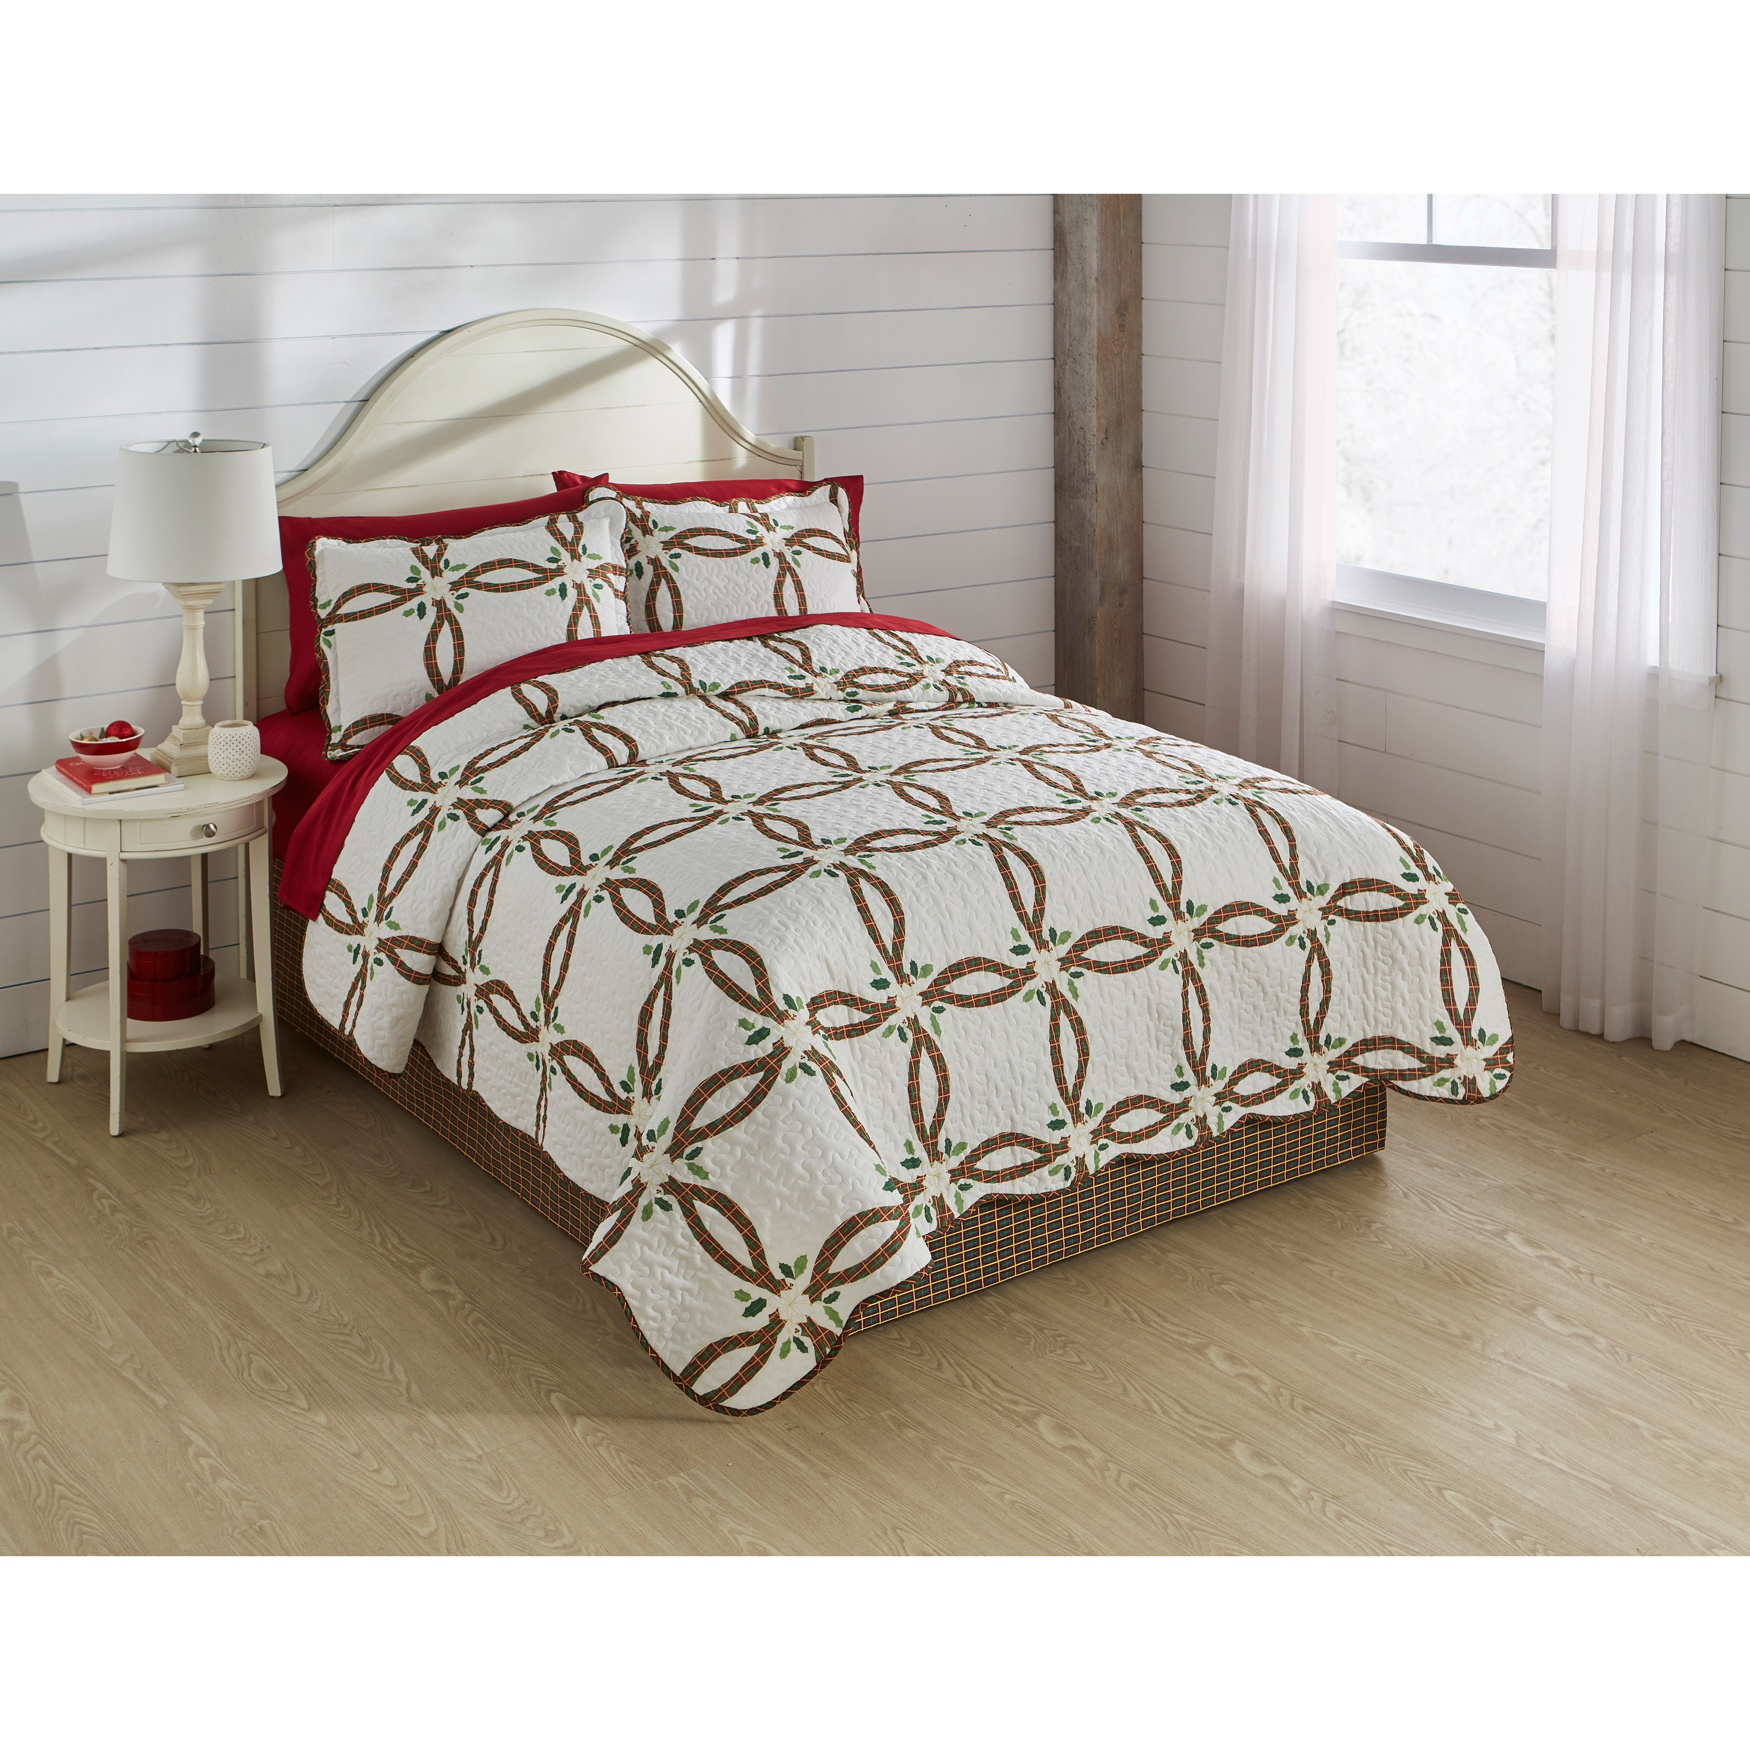 HOLLY 4-PC. QUILT SET, 